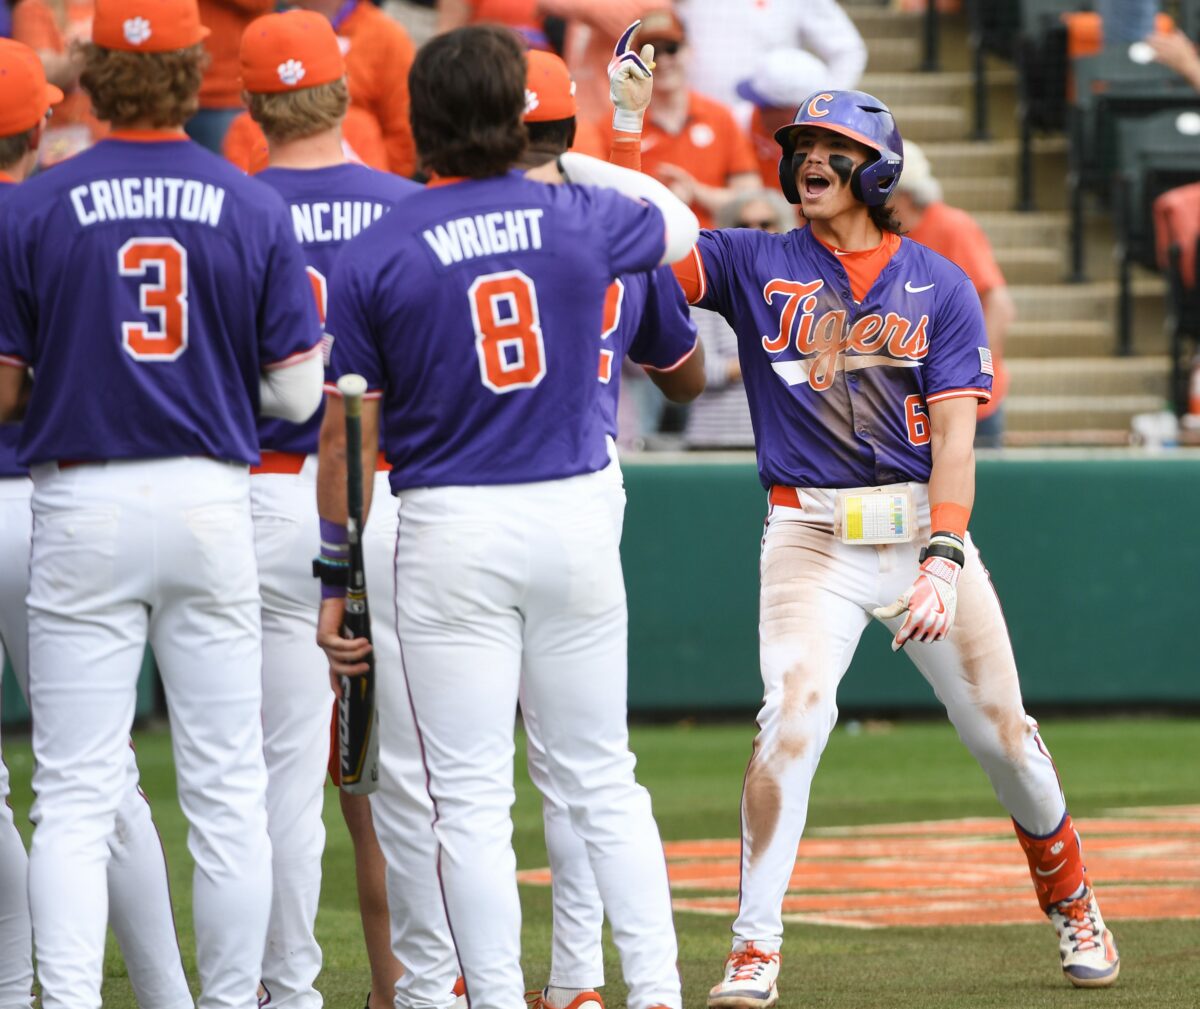 Clemson up to No. 2 in D1Baseball Top 25 rankings